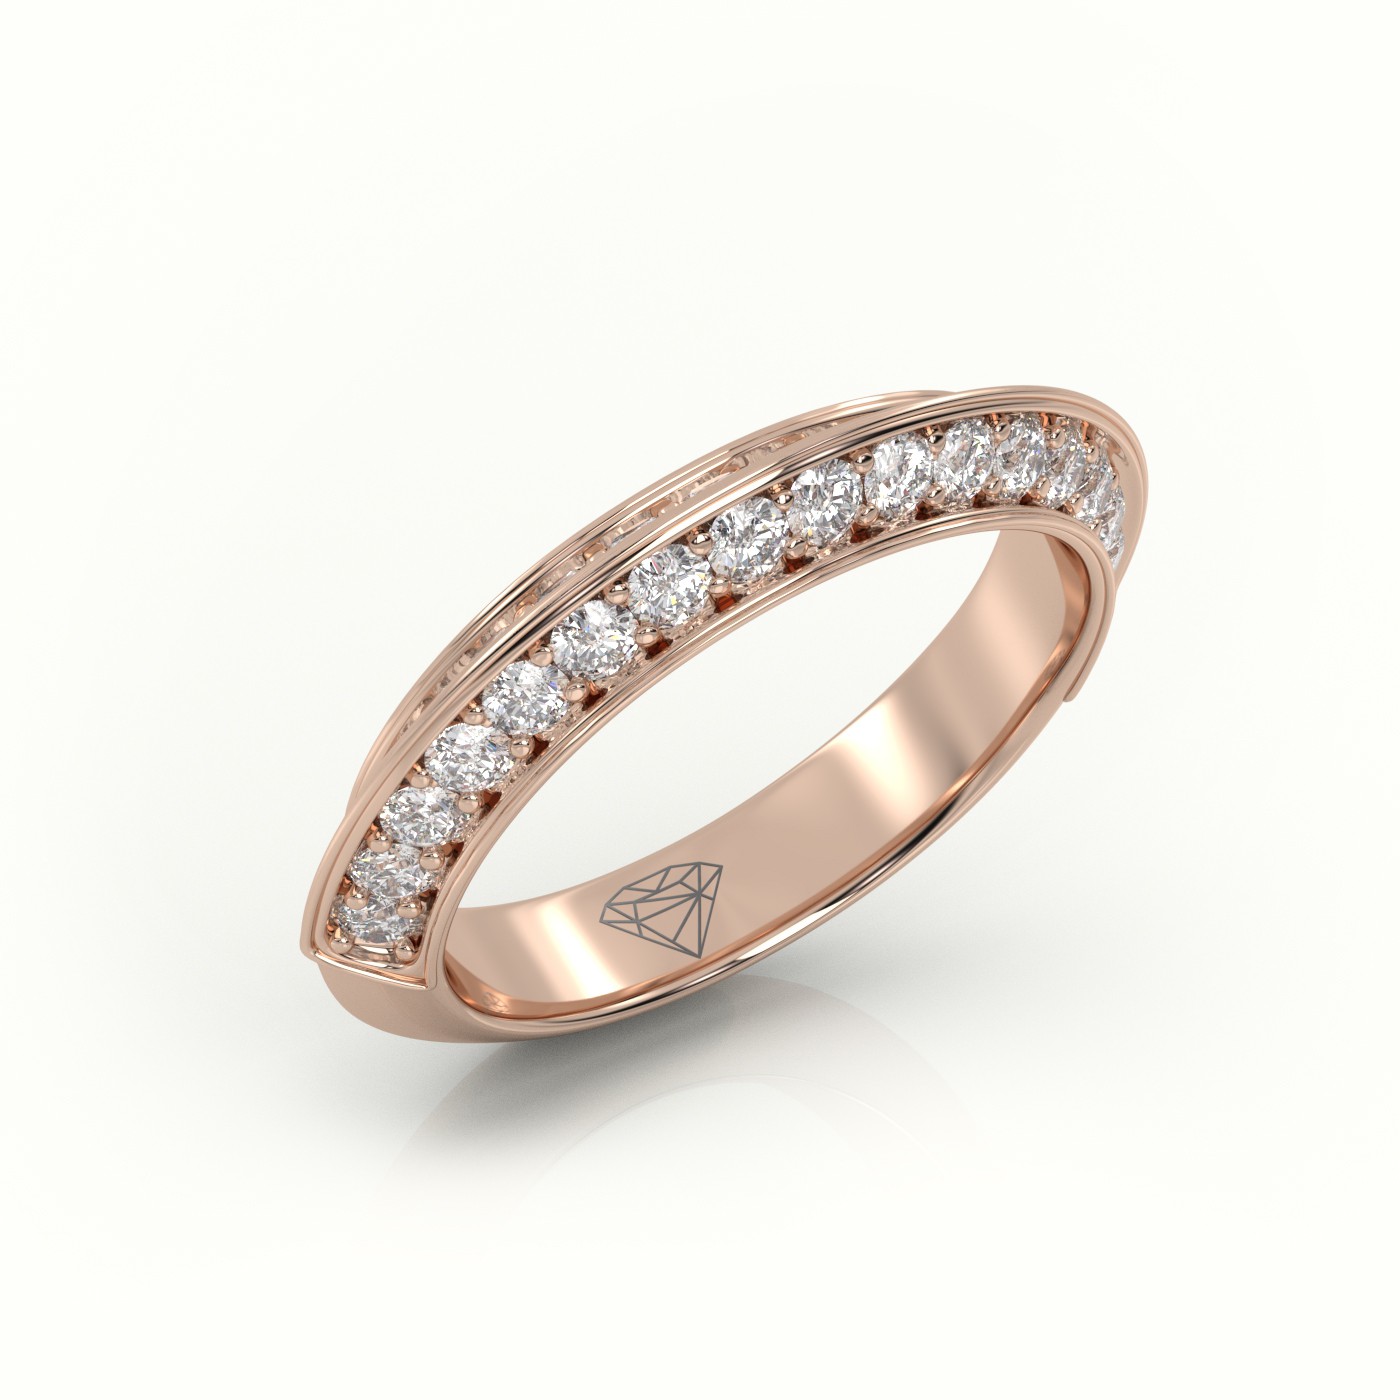 18k rose gold  round cut diamond double channel setting eternity wedding band Photos & images